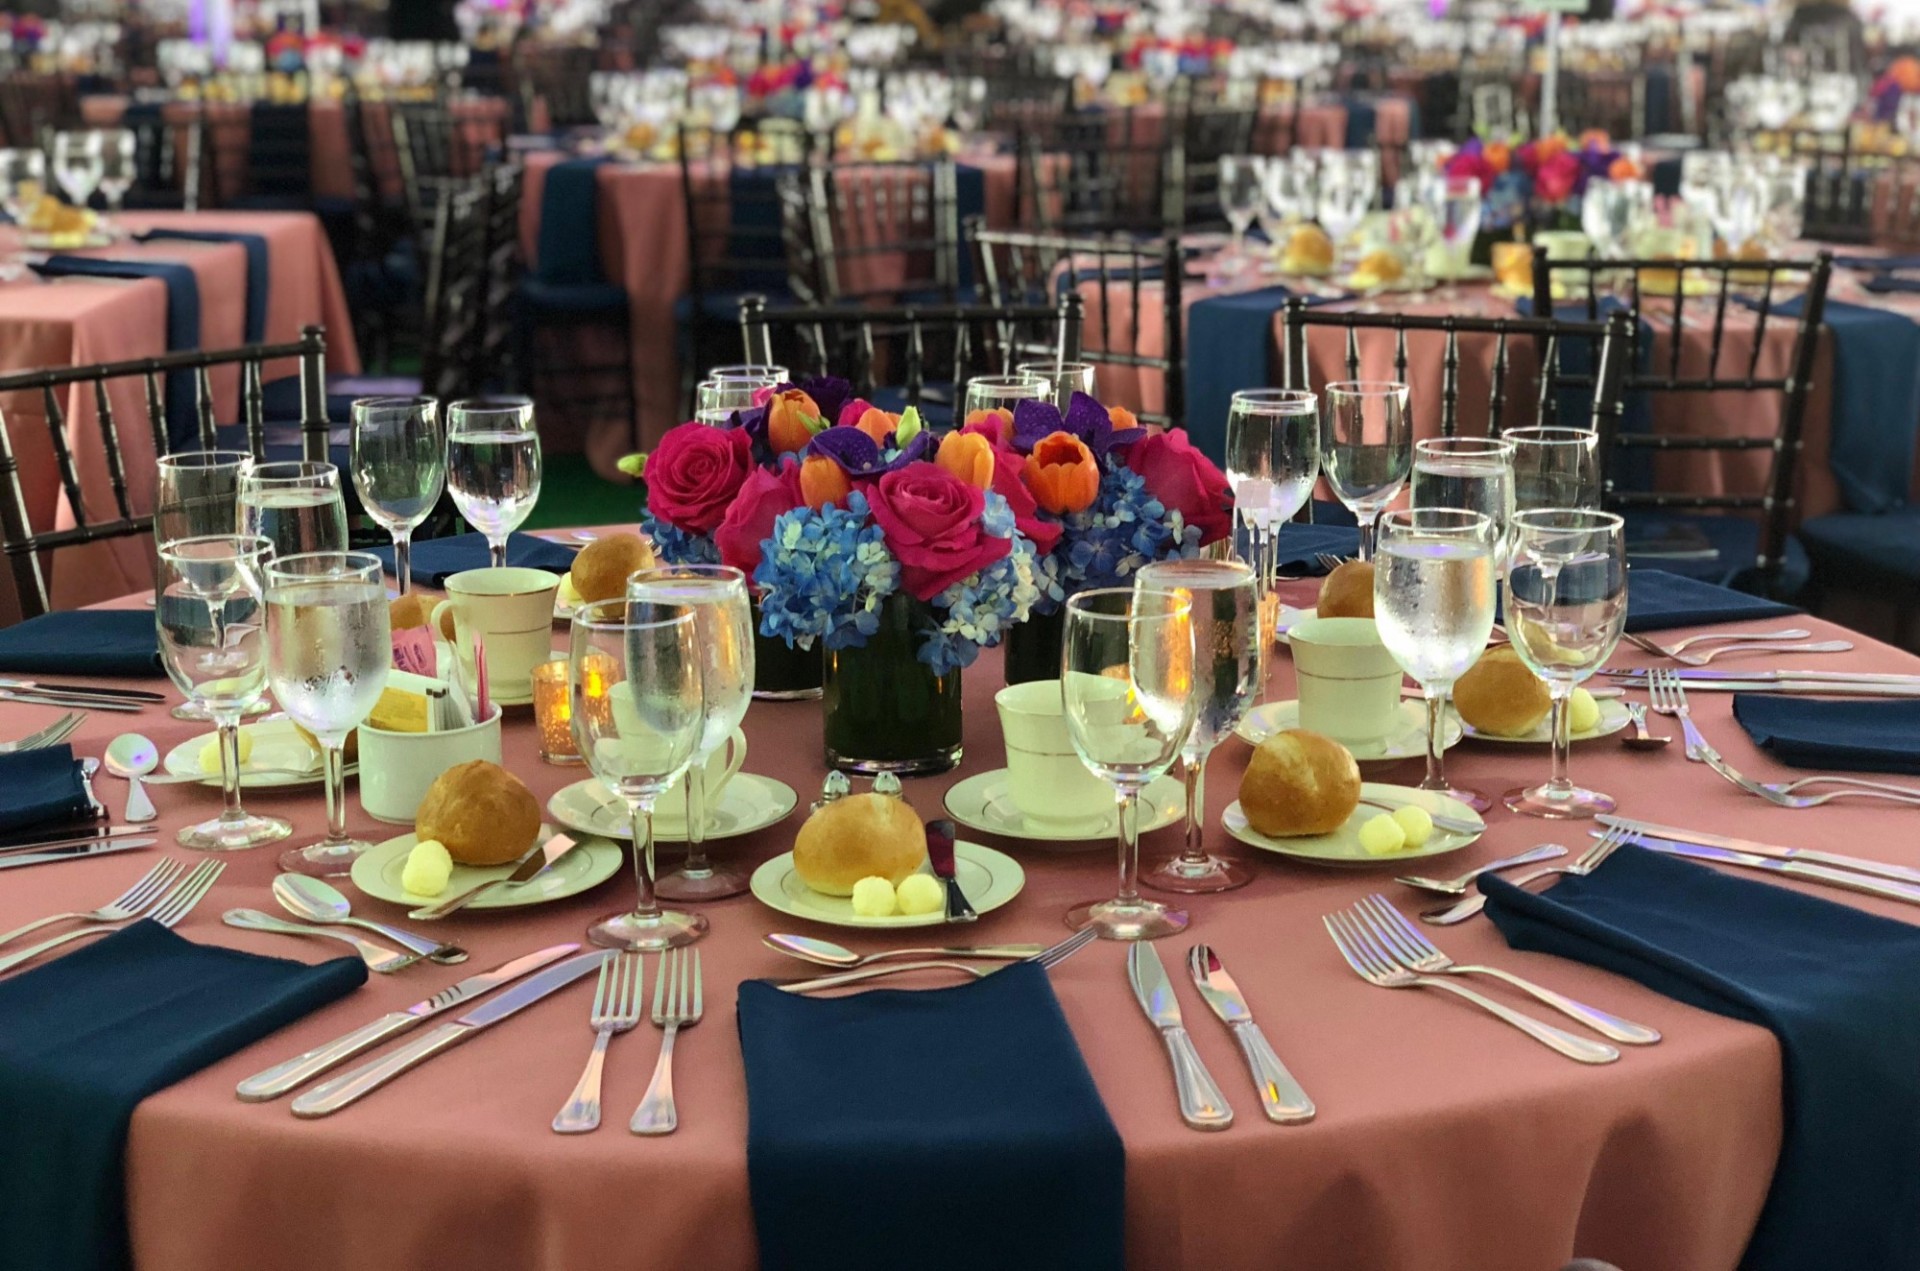 A banquet round is dressed with a pink tablecloth and navy blue napkins. Dinner rolls are placed at every place setting. At the center of the table is a fresh floral arrangement.